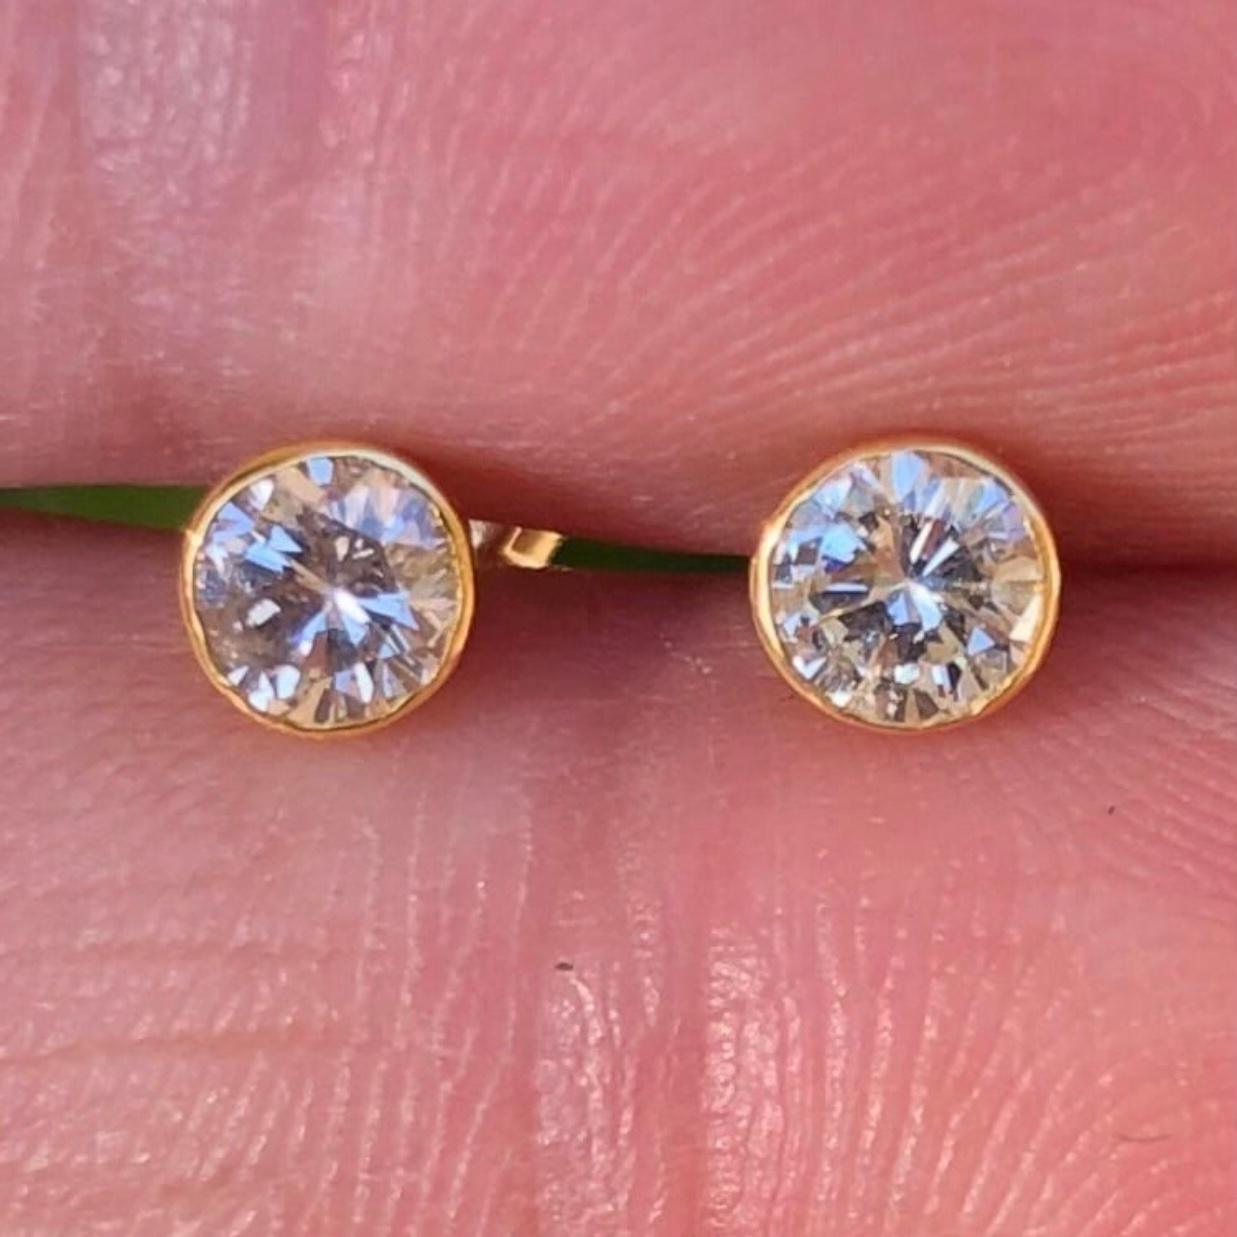 Classic near 1 carat solitaire diamond stud earrings in 14k yellow gold. Pair of natural earth-mined round brilliant diamonds weighing approx. .7 carats are bezel set in these 14K gold basket studs.

Diamond stud earrings come with solid 14k gold